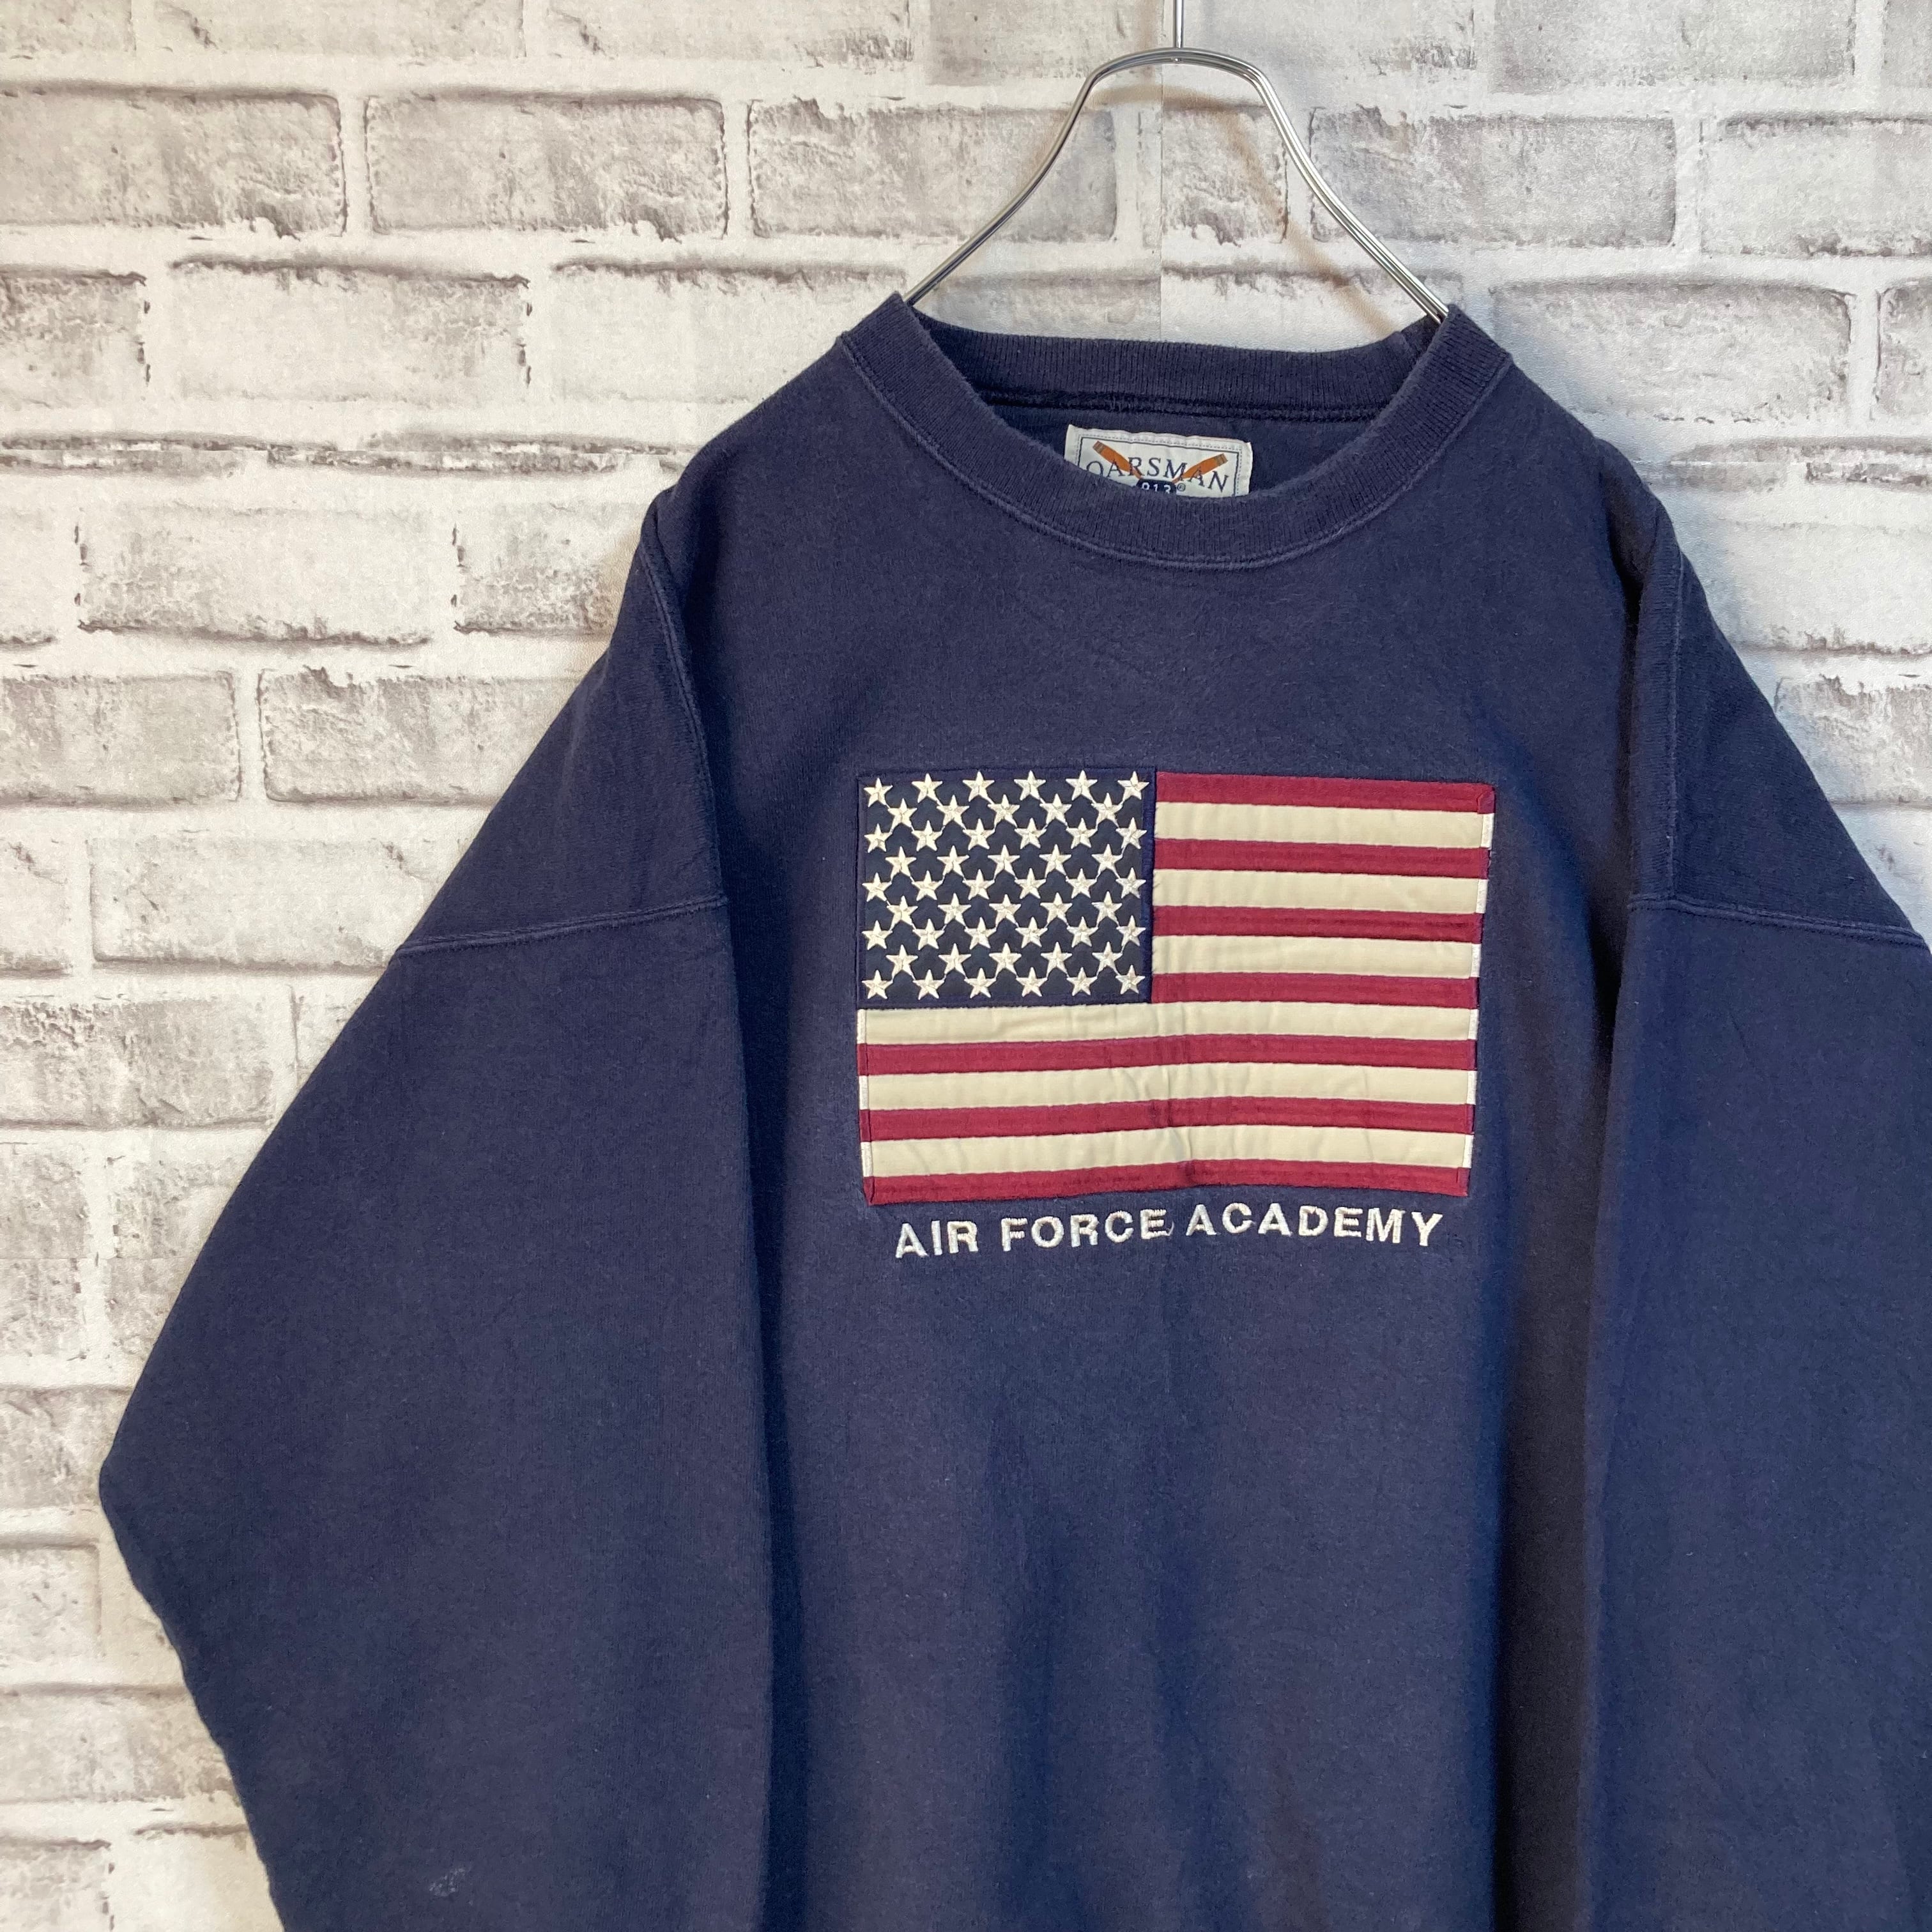 OARSMAN913】L/S Sweat XL Made in USA 90s ”AIR FORCE ACADEMY” USA